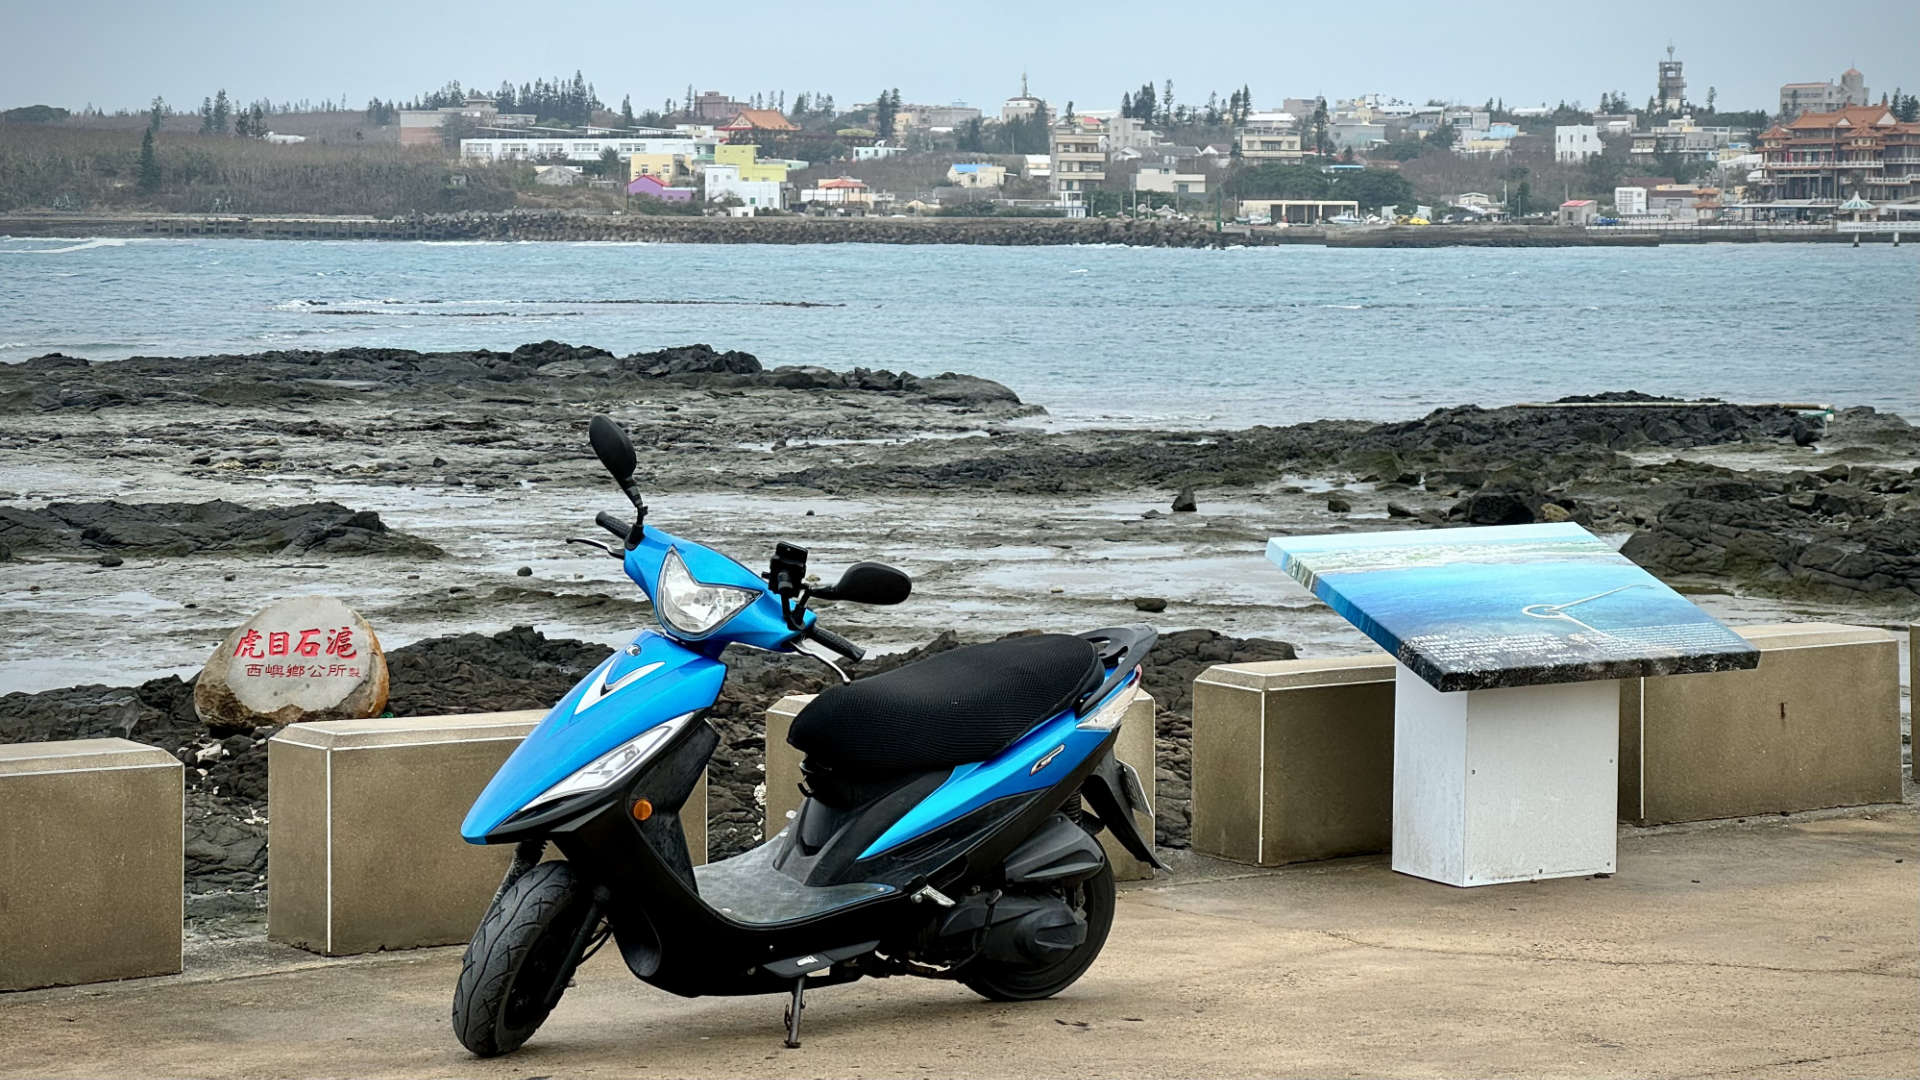 A scooter parked near a rocky foreshore.